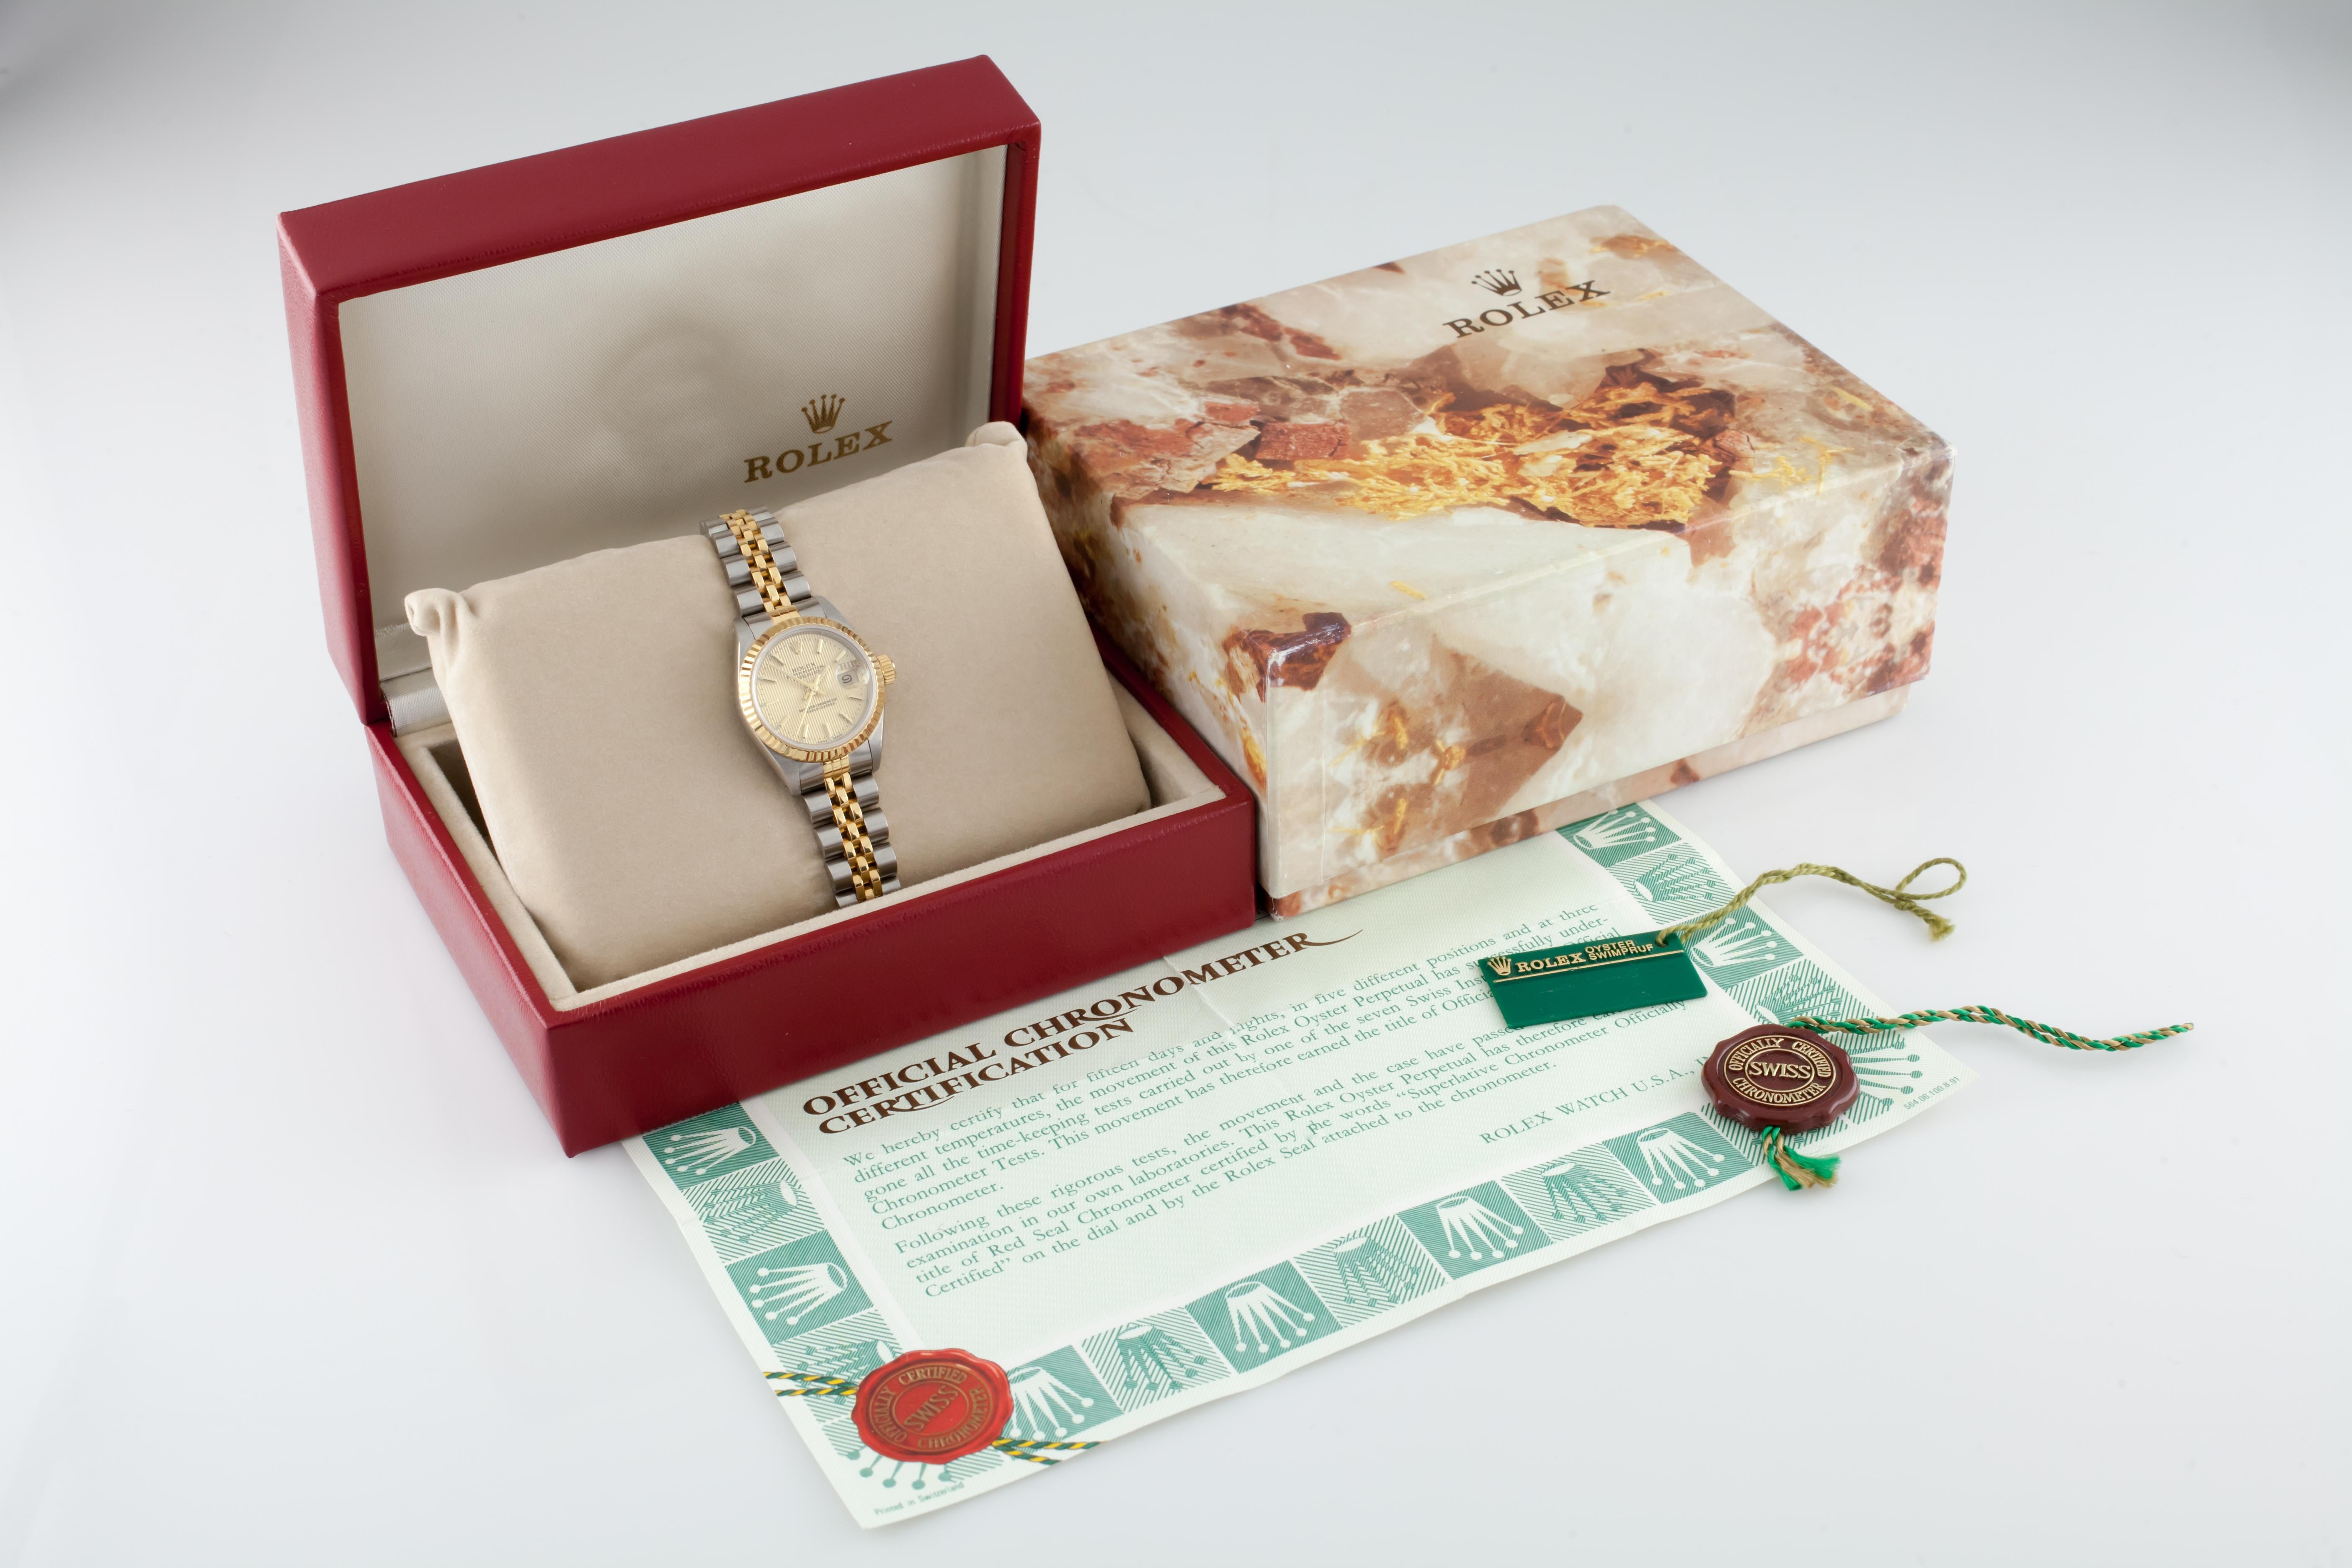 Rolex Women's OPDJ 69173 Two-Tone 18 Karat/SS with Original Box and Papers 4